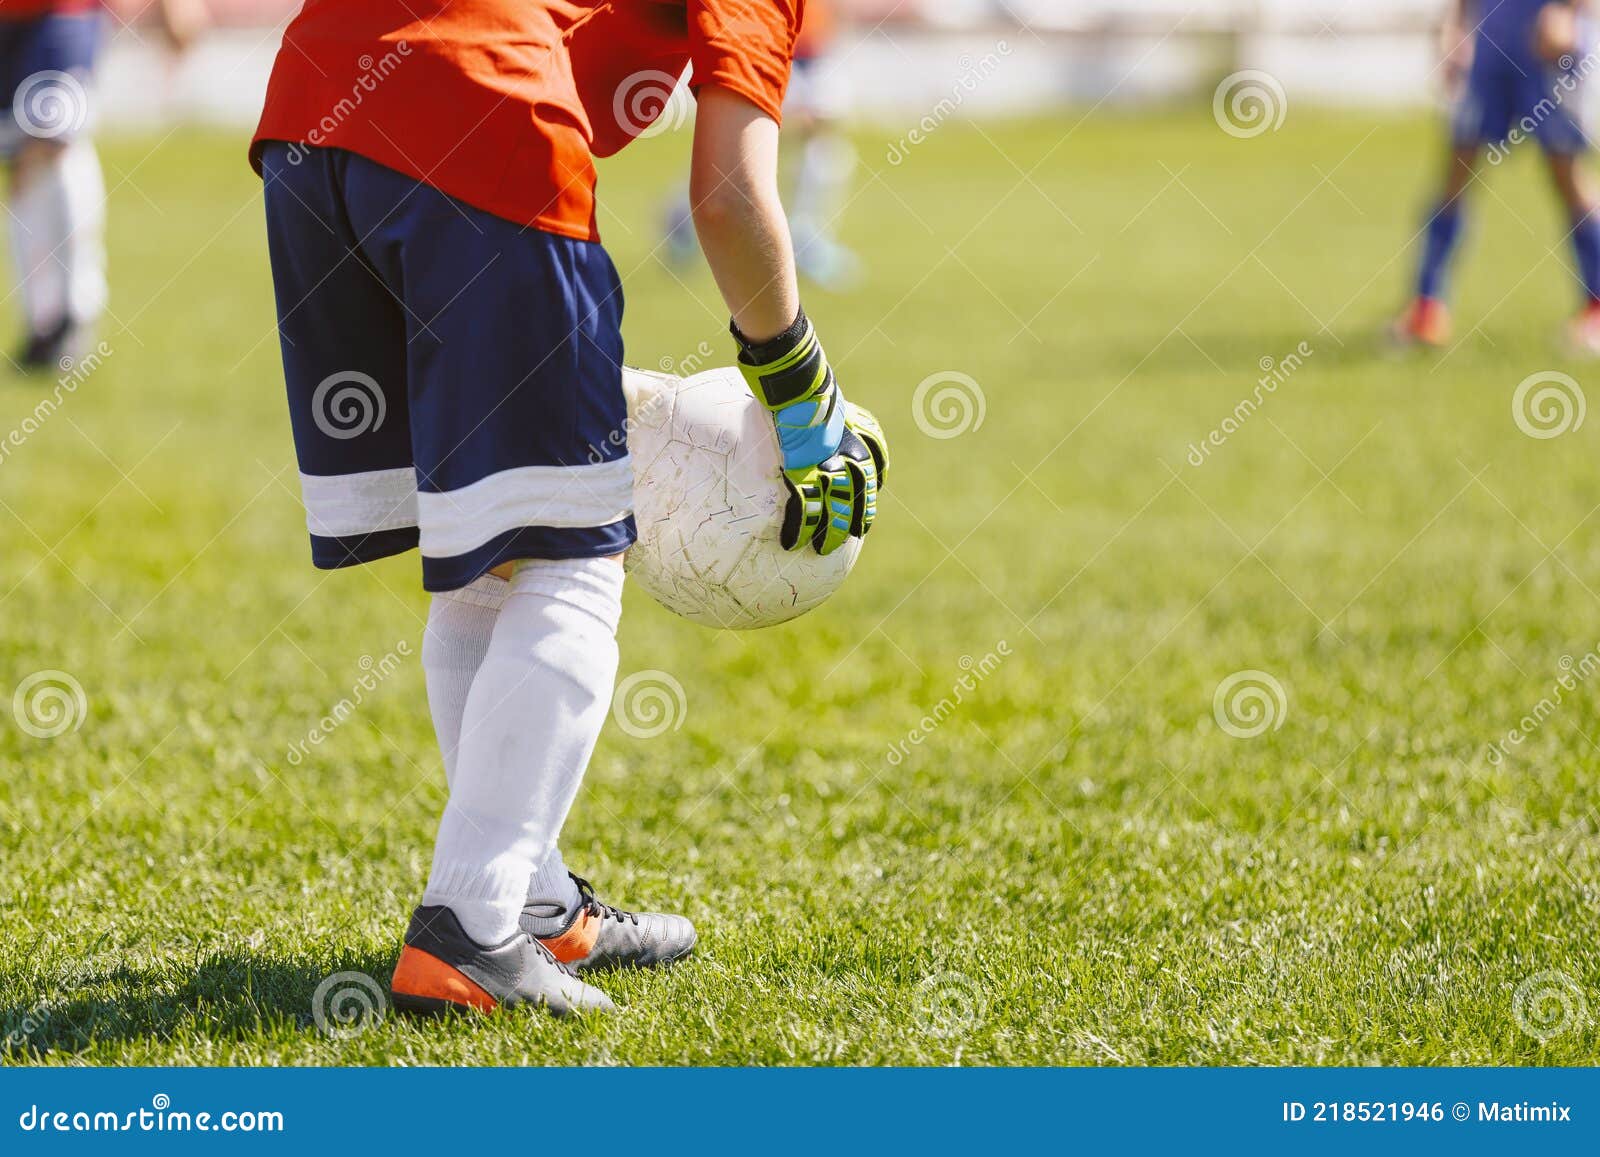 Young Boy Soccer Football Goalkeeper Holding Ball in Hand Gloves. School Kids Playing Sports Game